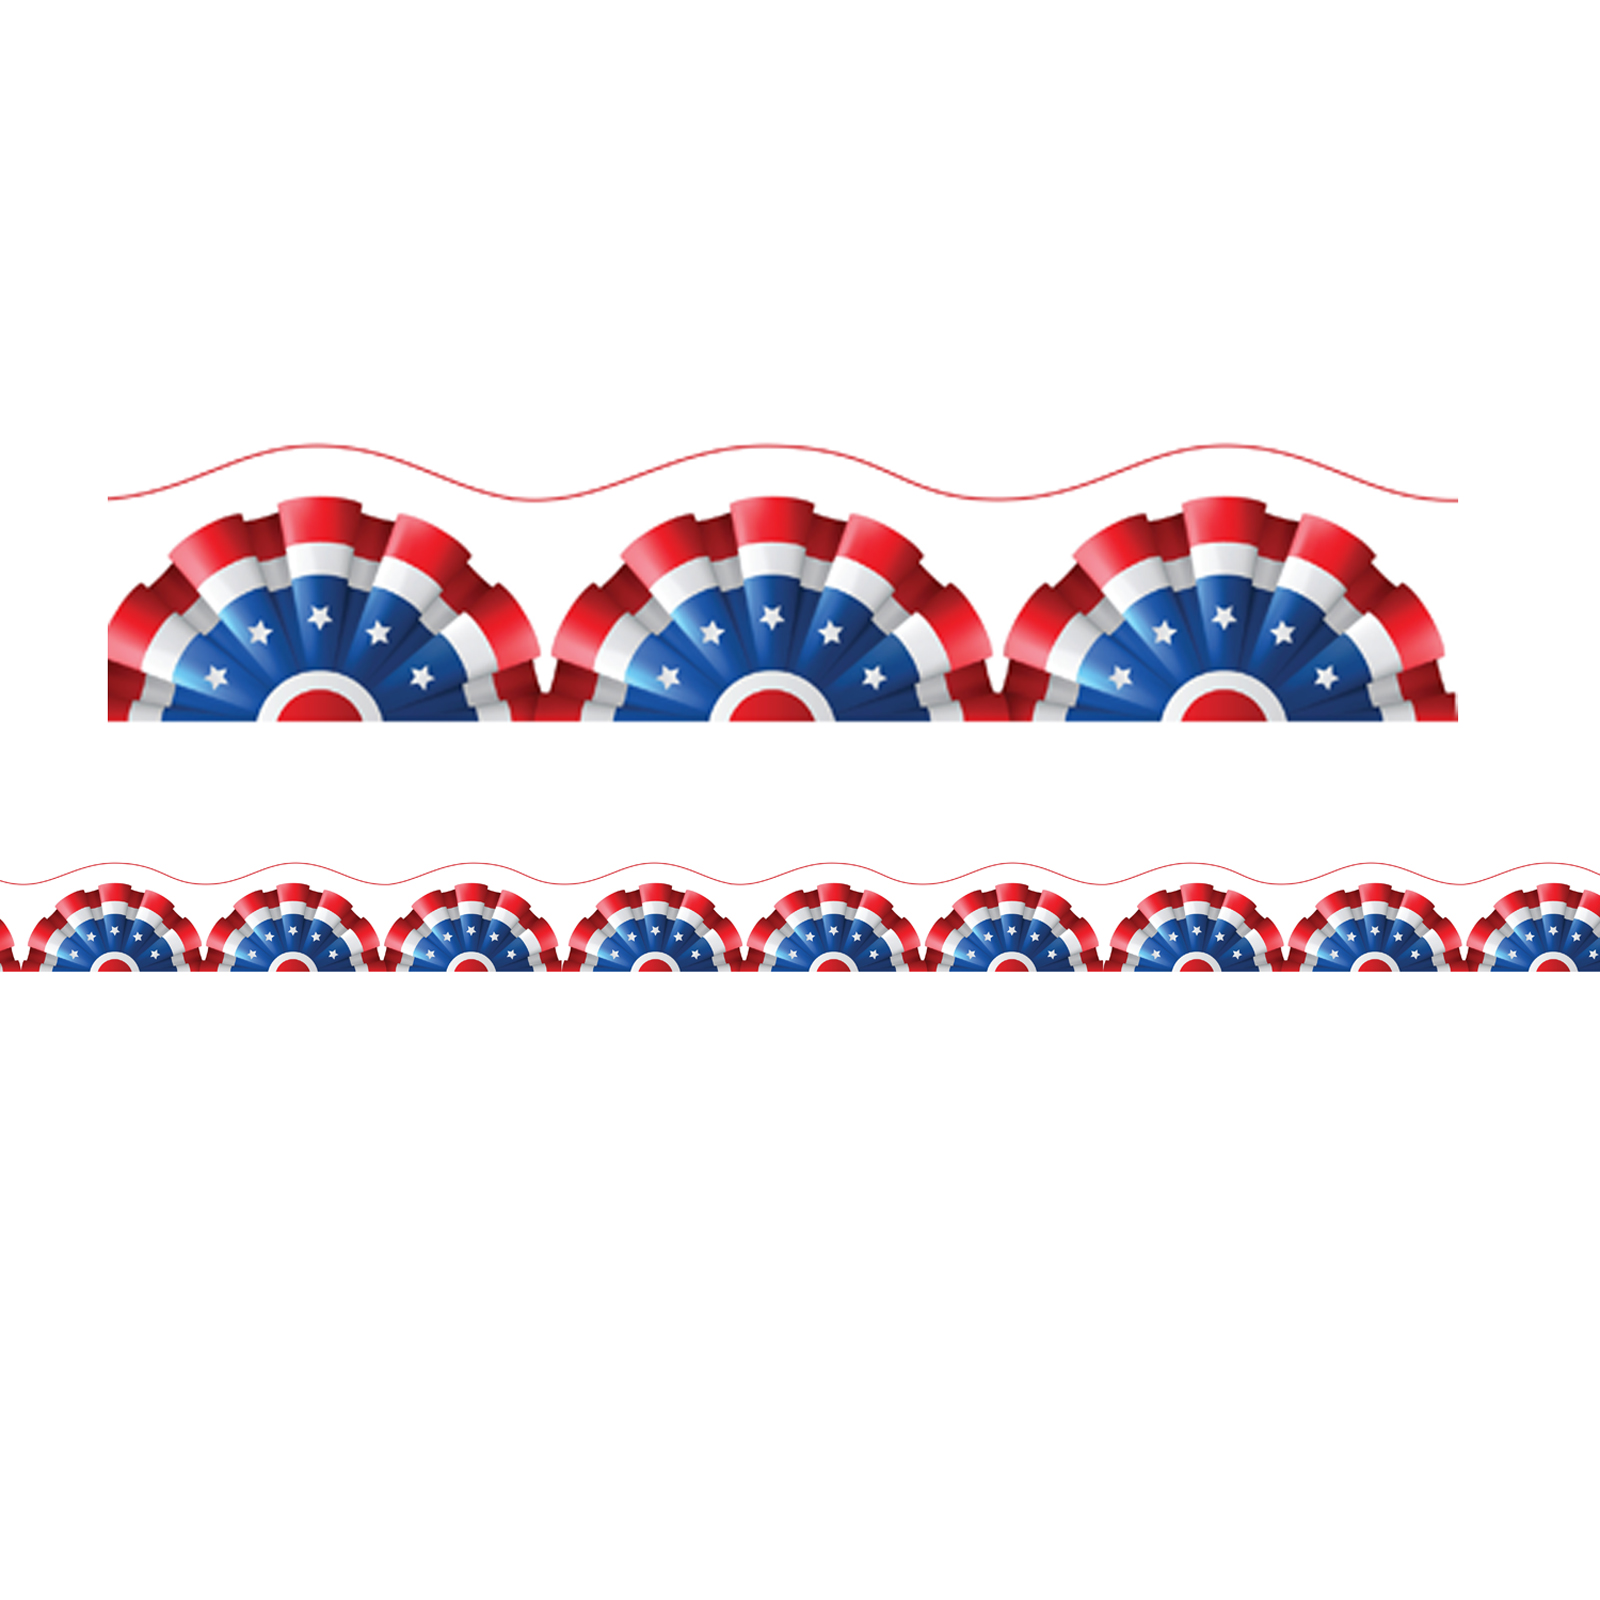 Magnetic Scallop Borders/Trims, 1.5" x 24", Patriotic Theme, Pack of 12